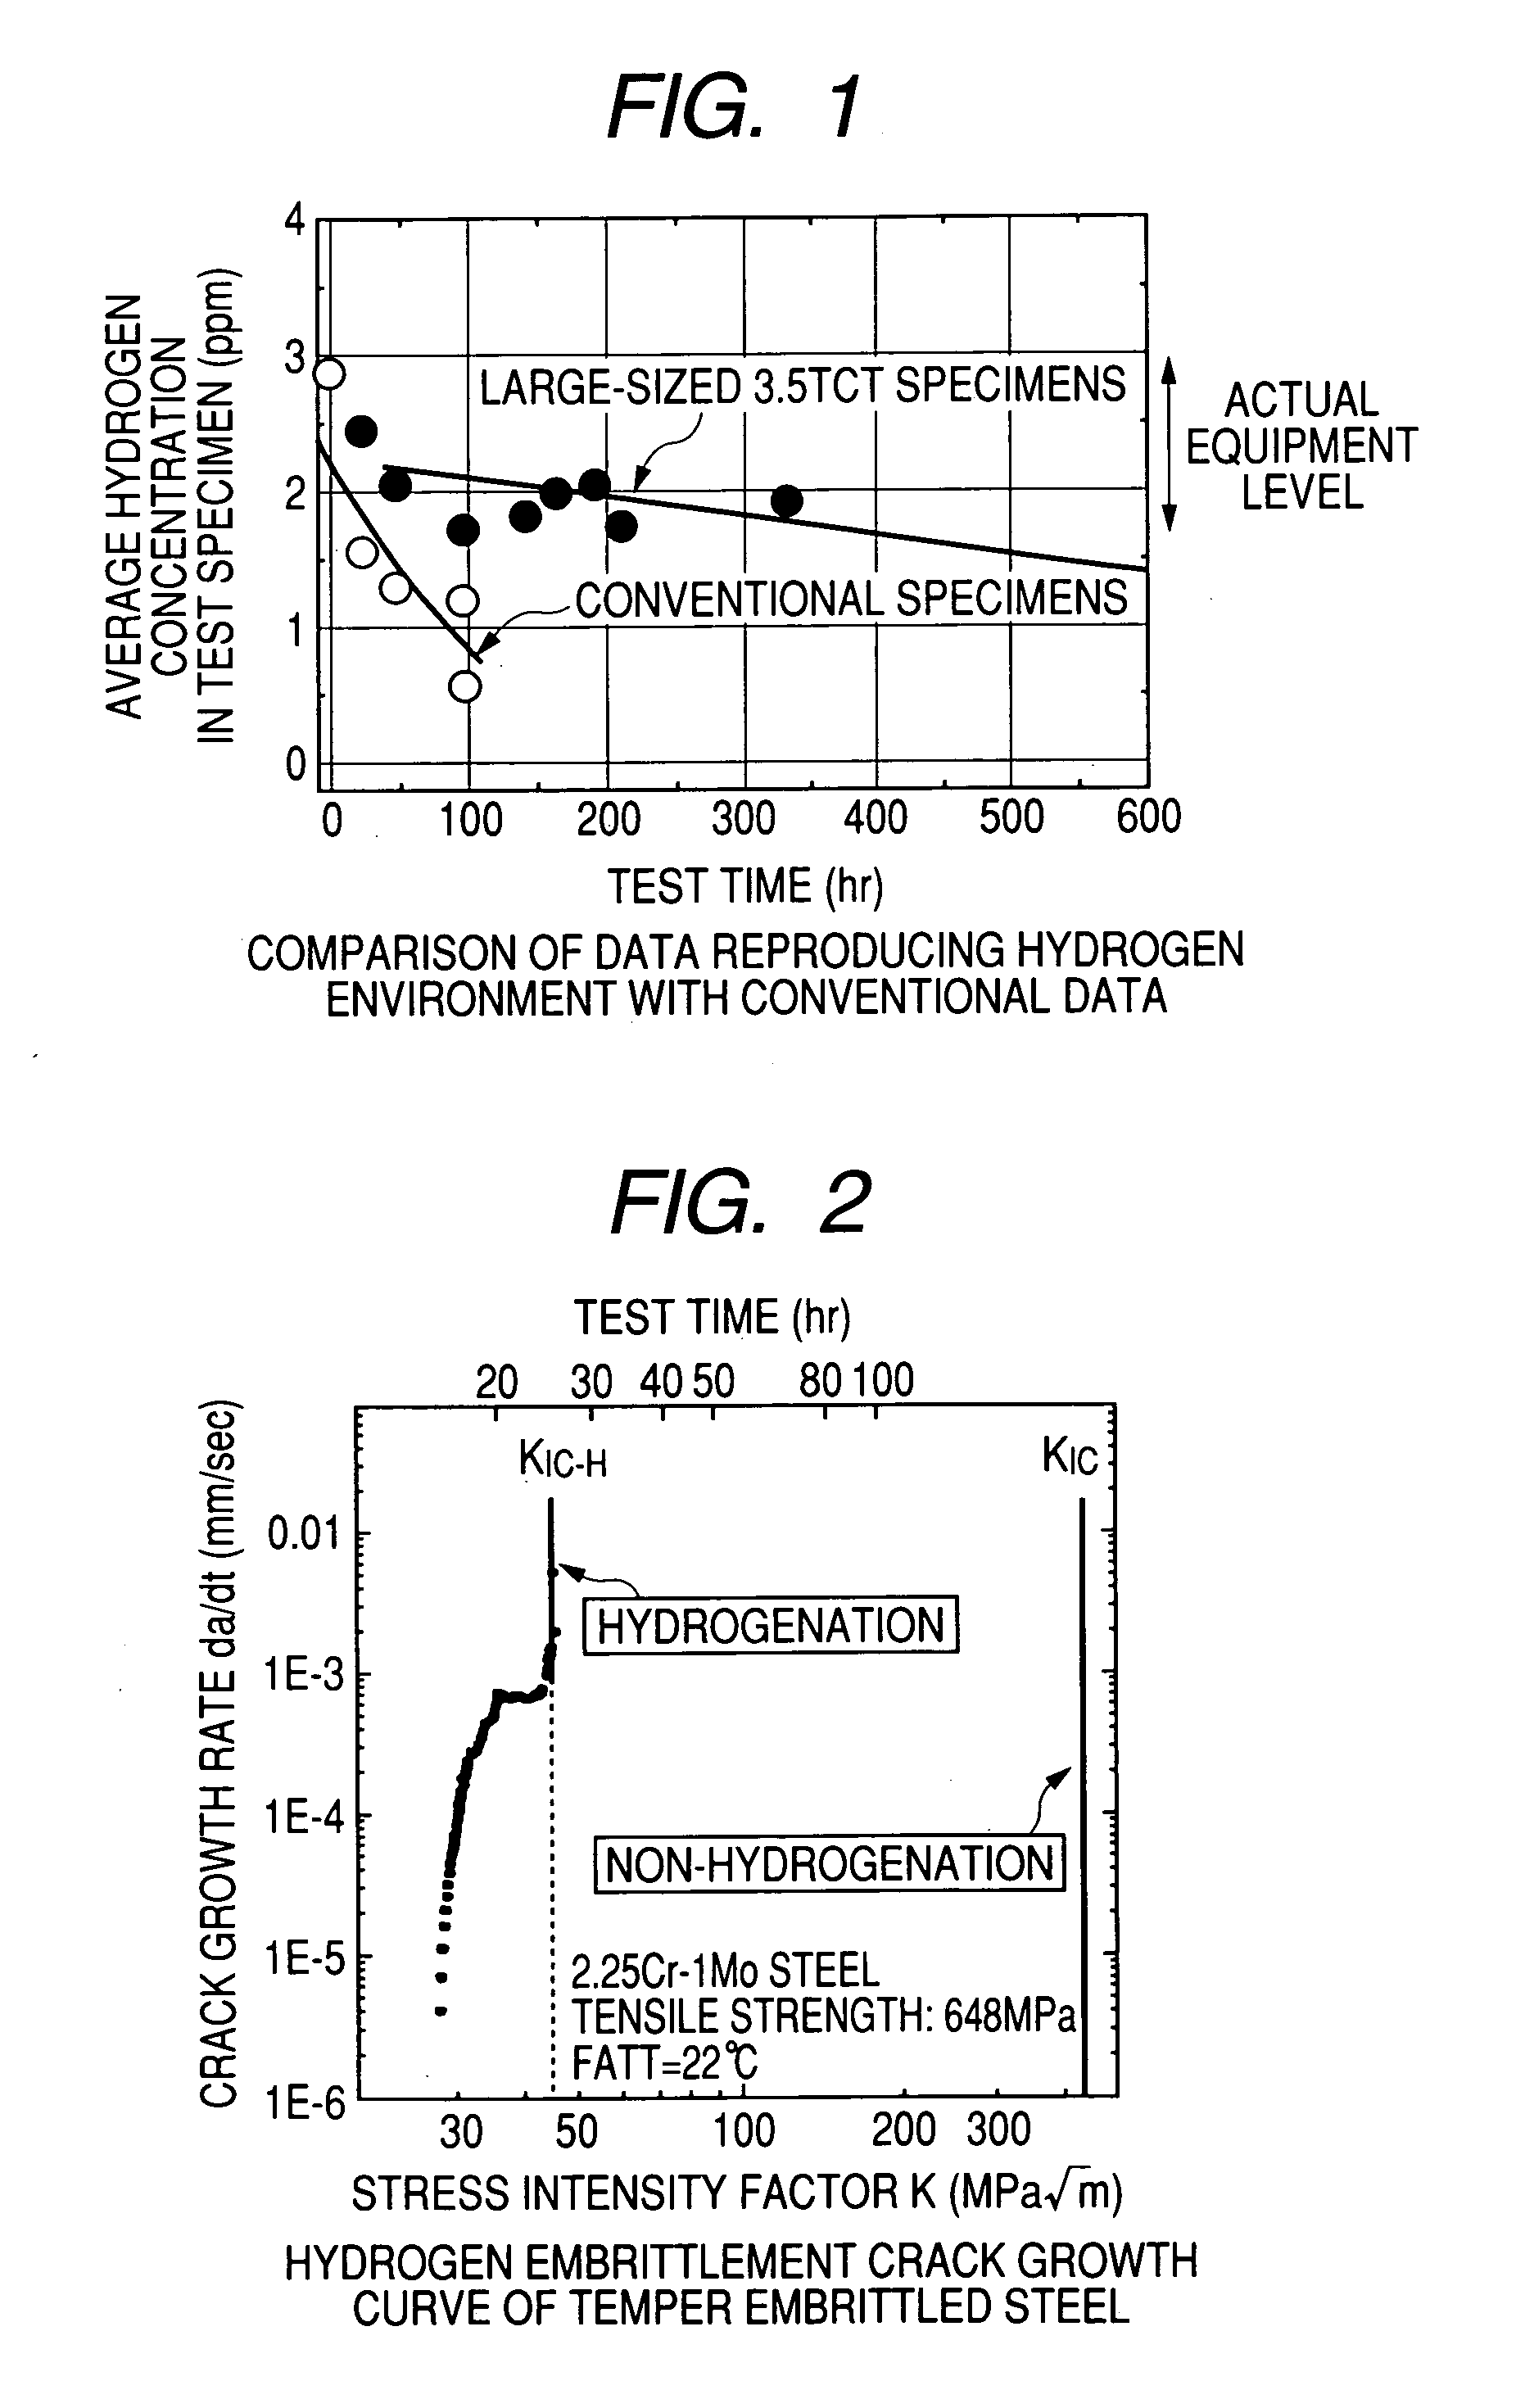 Method of judging hydrogen embrittlement cracking of material used in high-temperature, high-pressure hydrogen environment